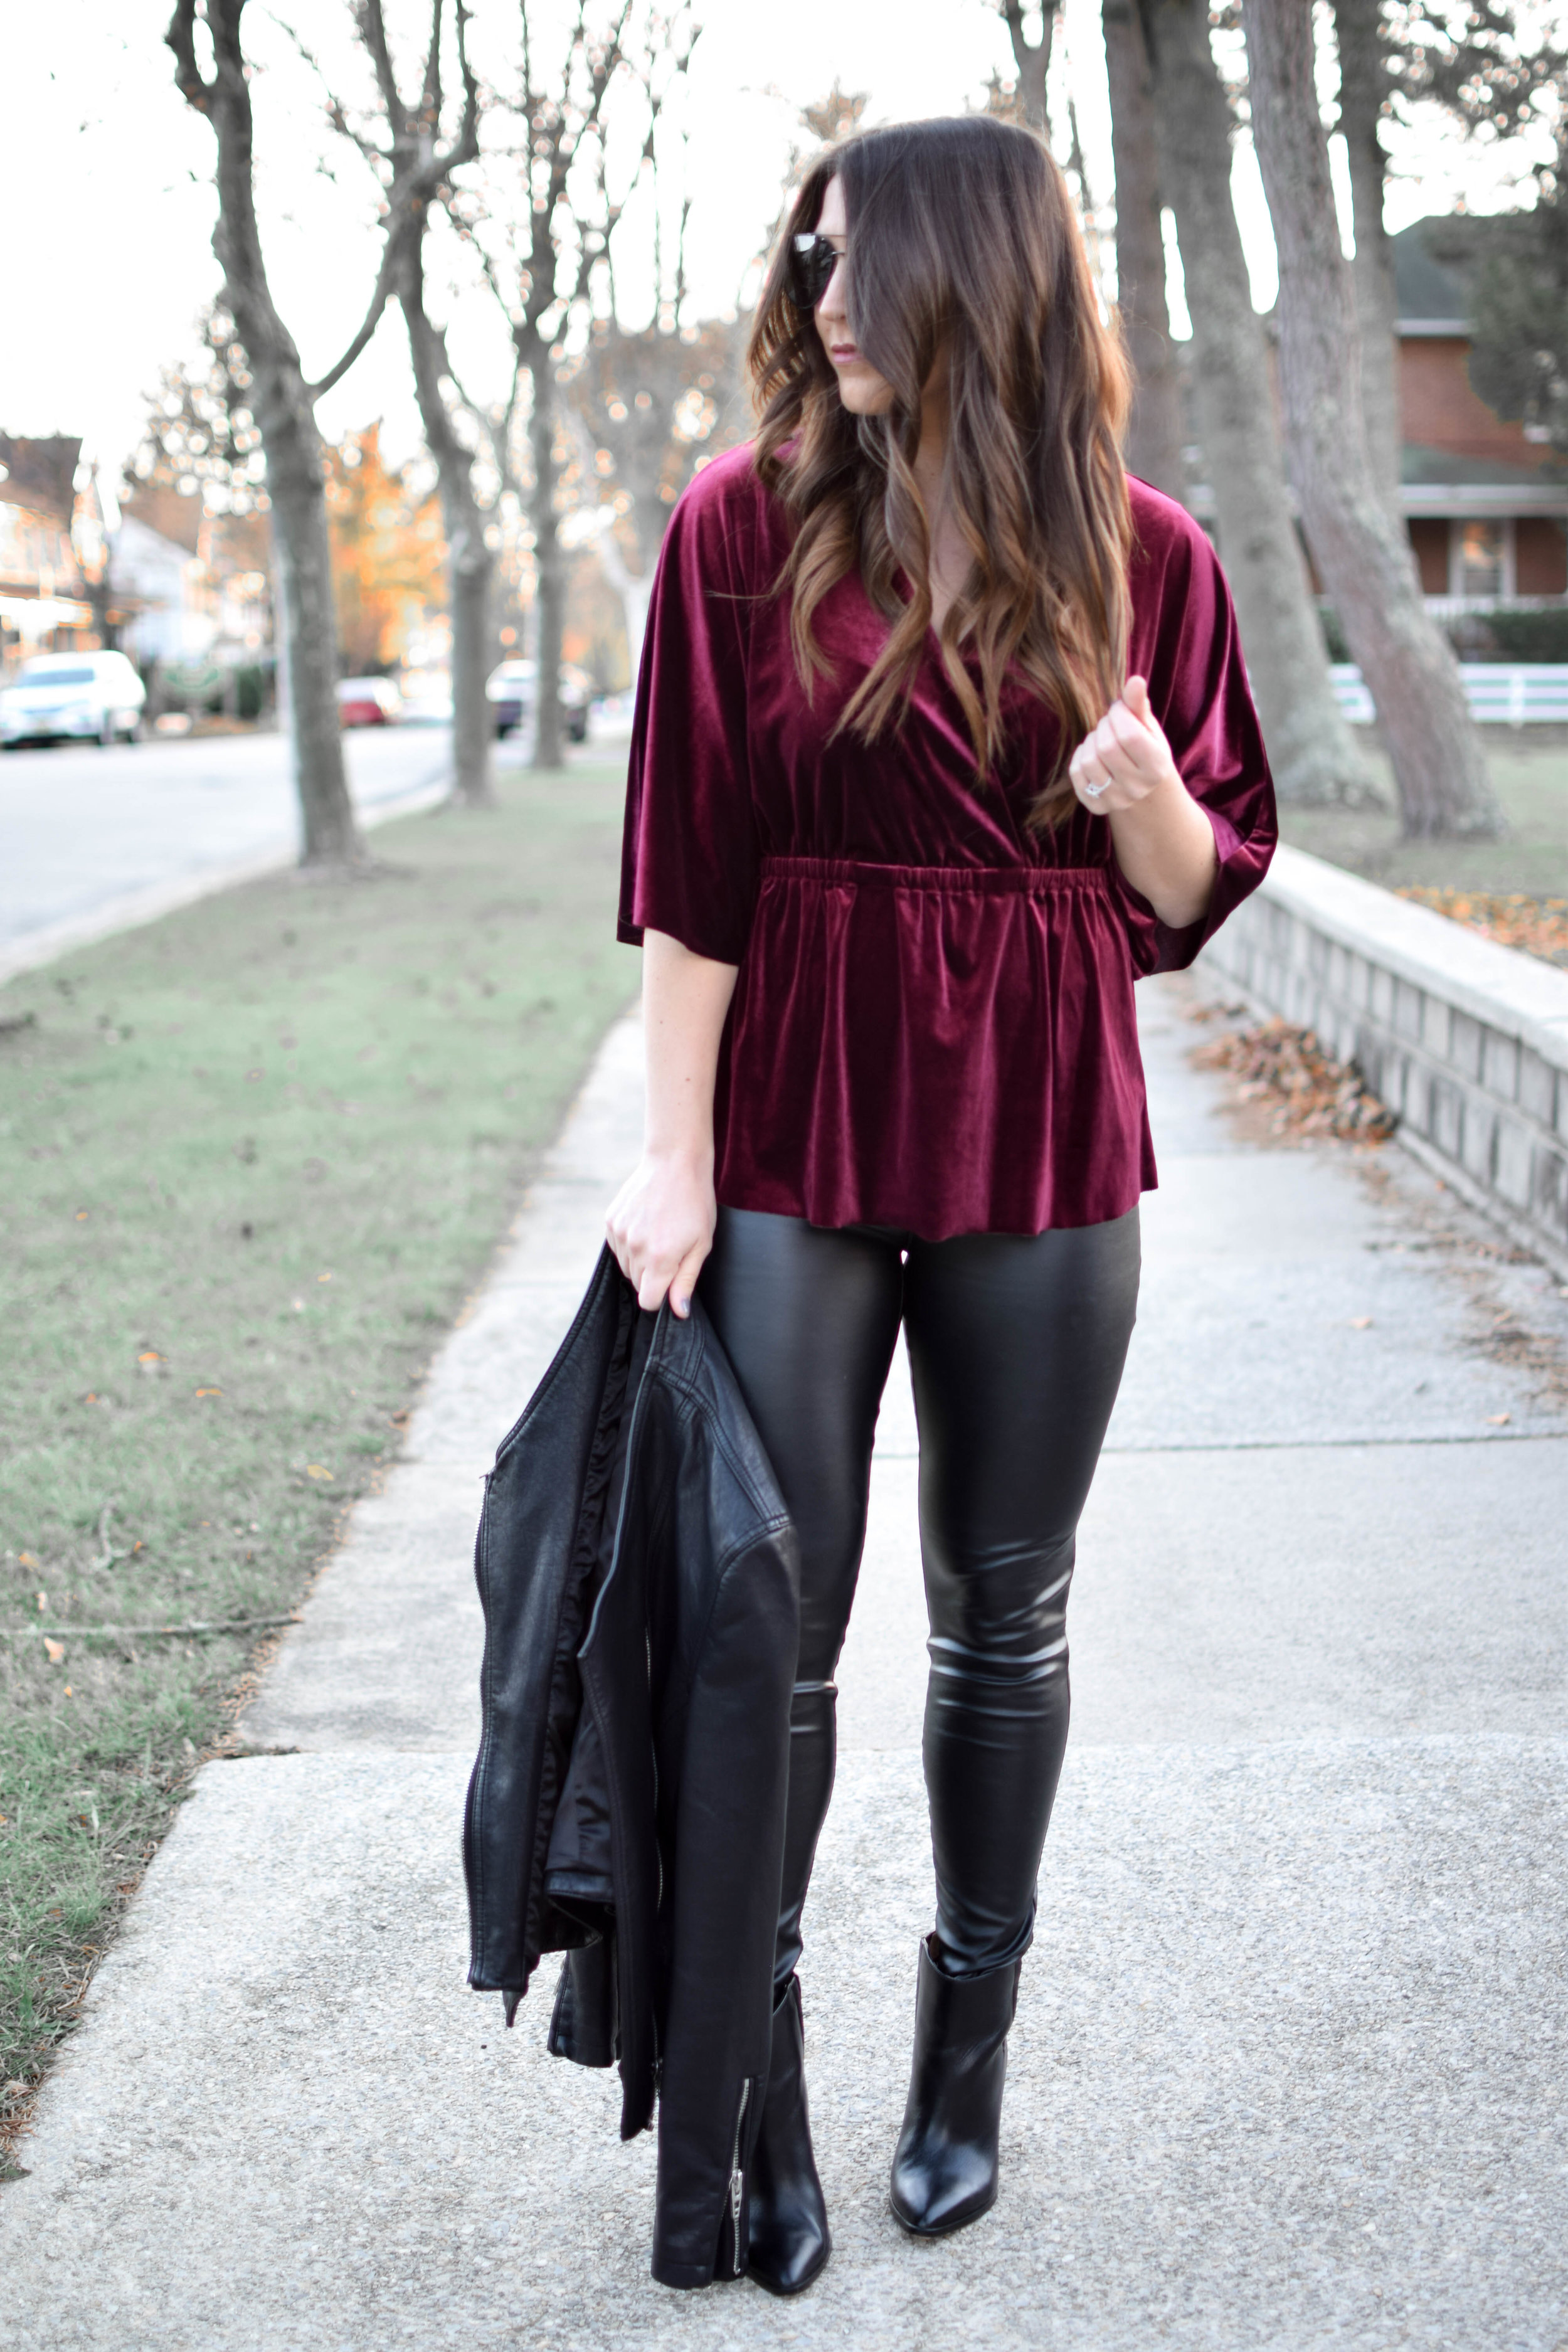 velvet top outfit